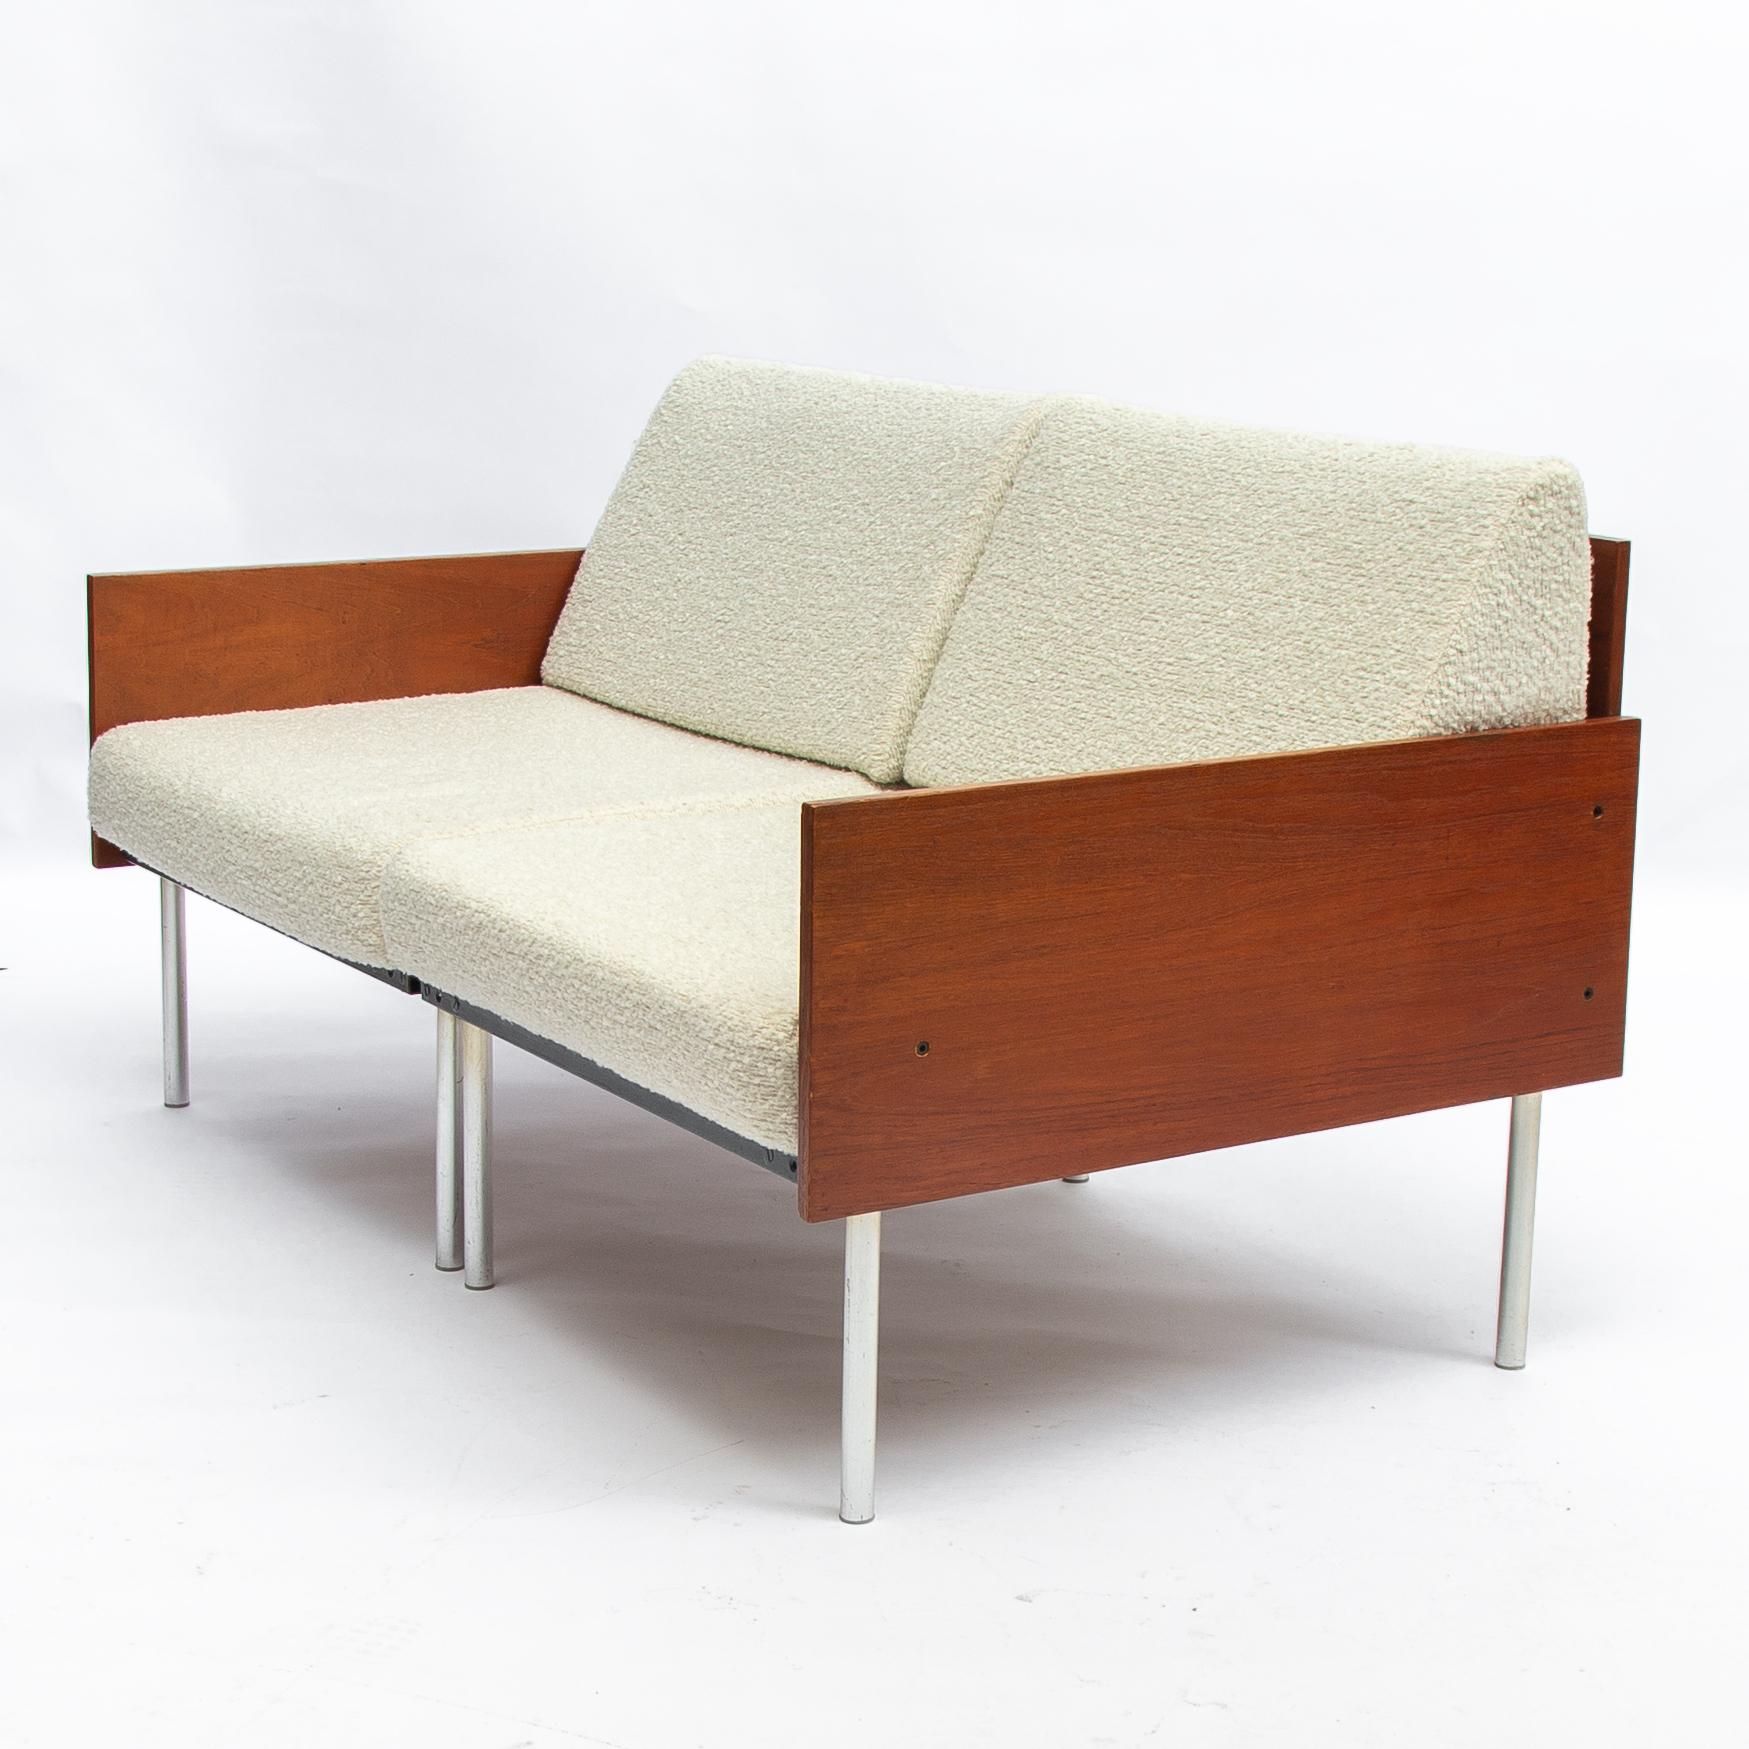 Dutch Modular Sectional Sofa with Wooden Back, Re-Upholstered with a Crackle Fabric